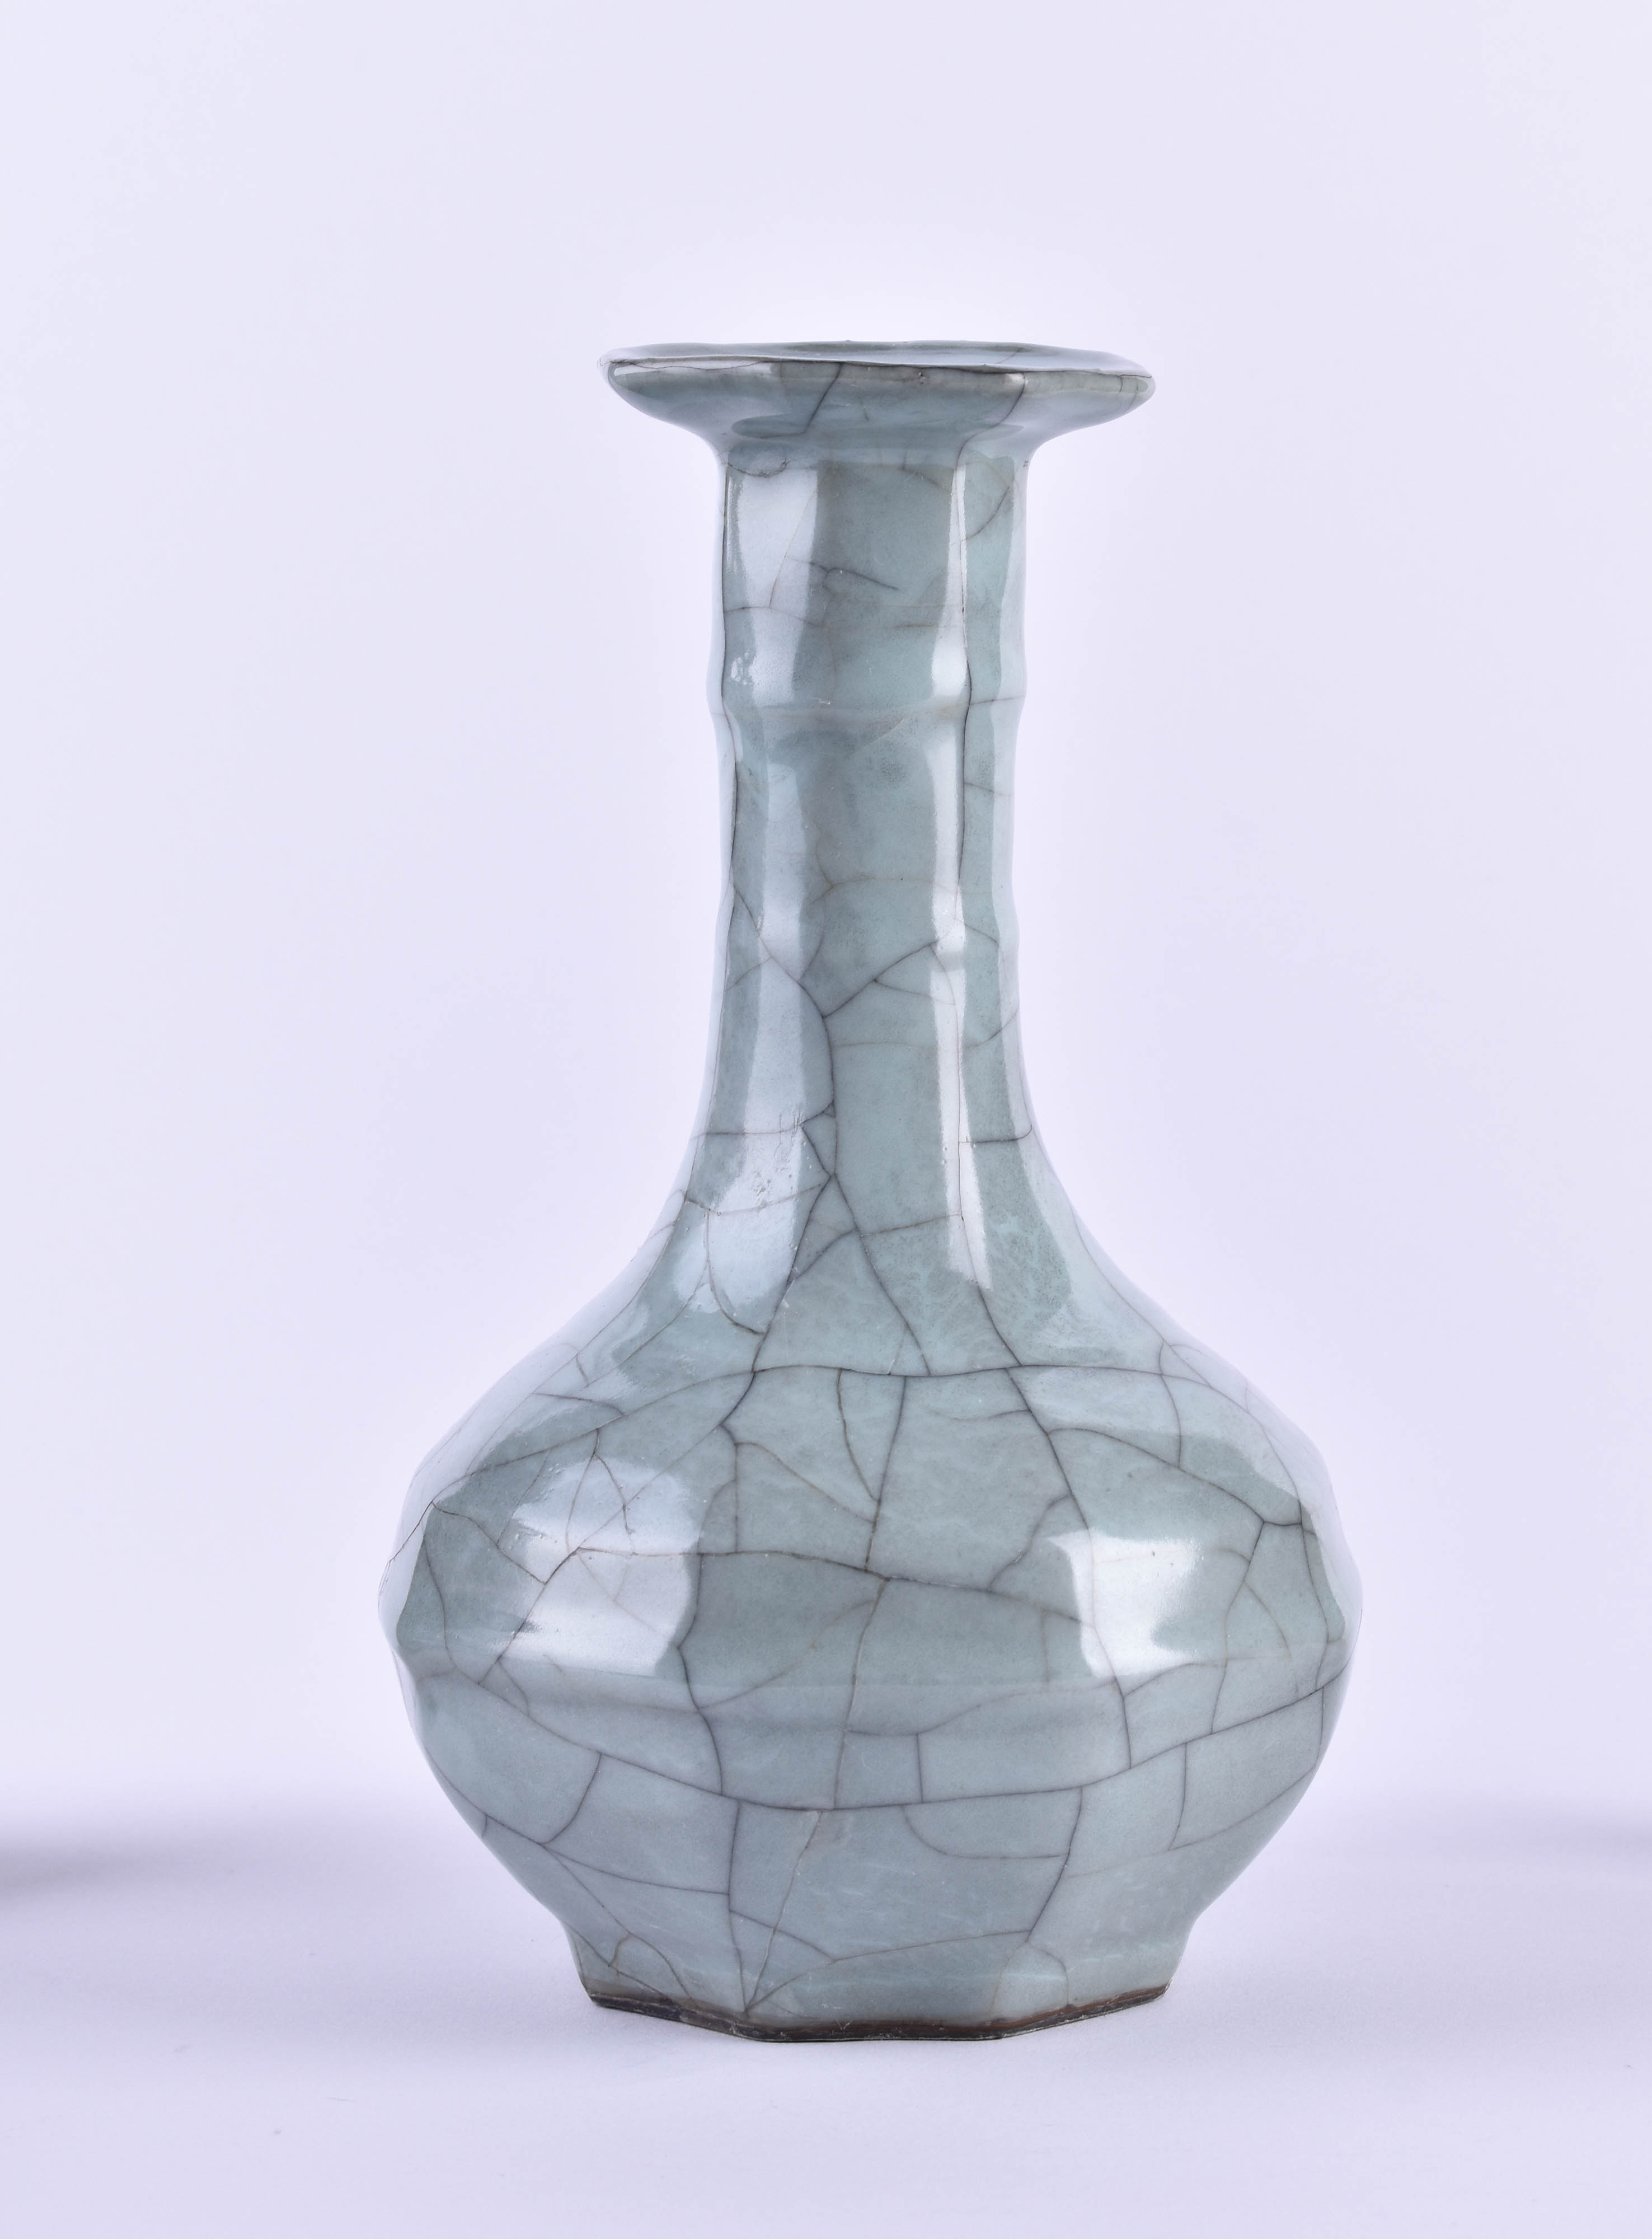 Celadon Vase China Song Style, 18th/19th century - Image 2 of 5